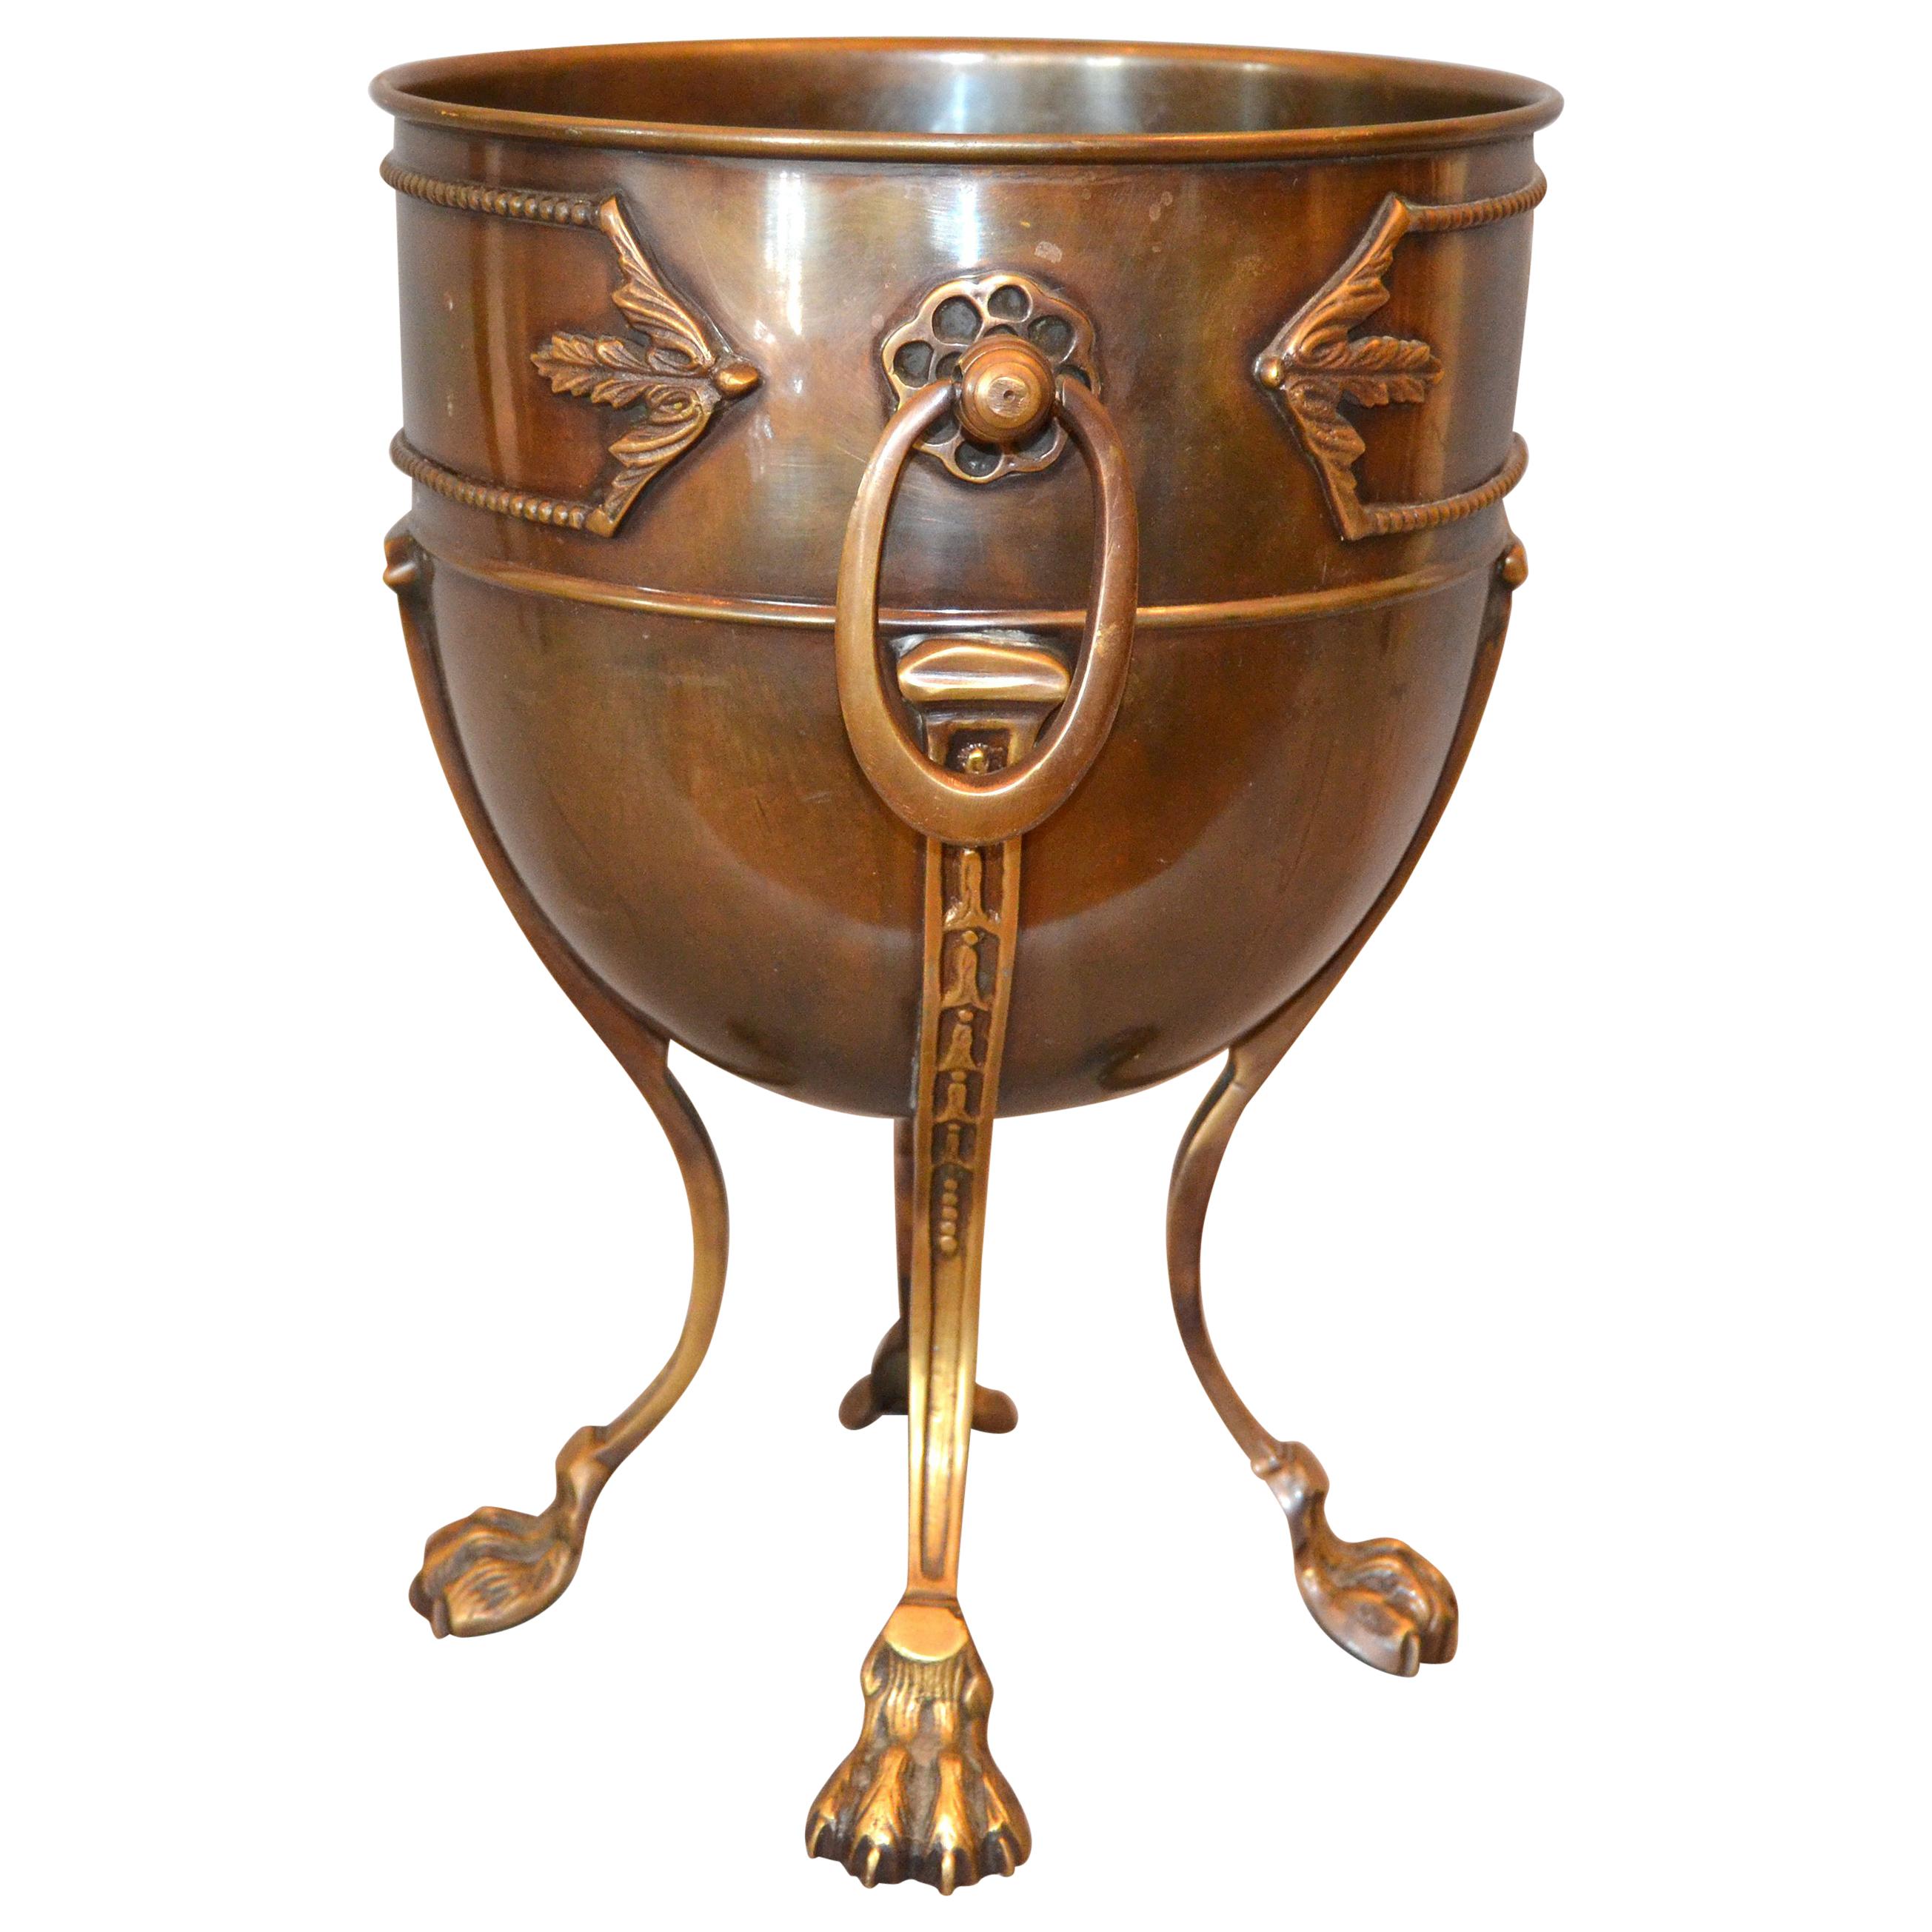 Vintage Handcrafted Ornate Bronze Wine Bucket, Ice Bucket with Claw Feet